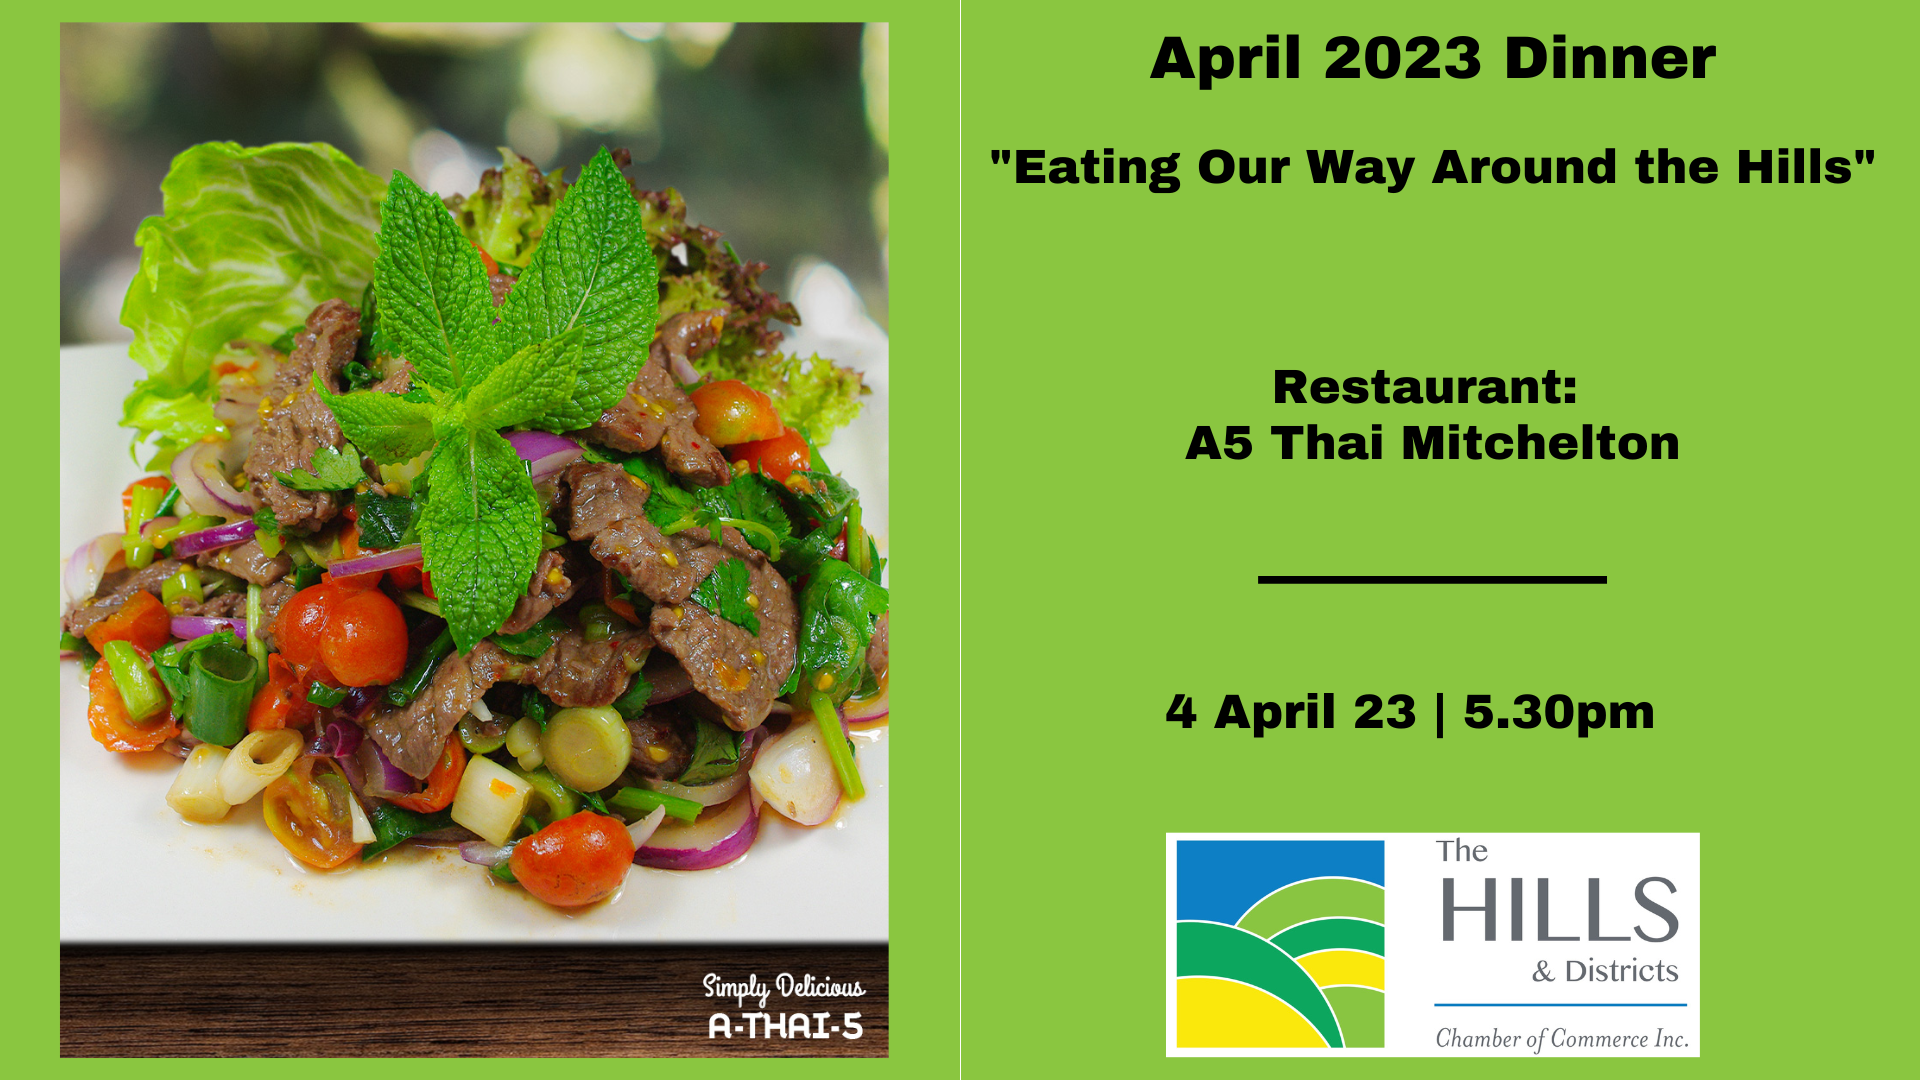 Dinners » April 2023 “Eating Our Way Around the Hills”